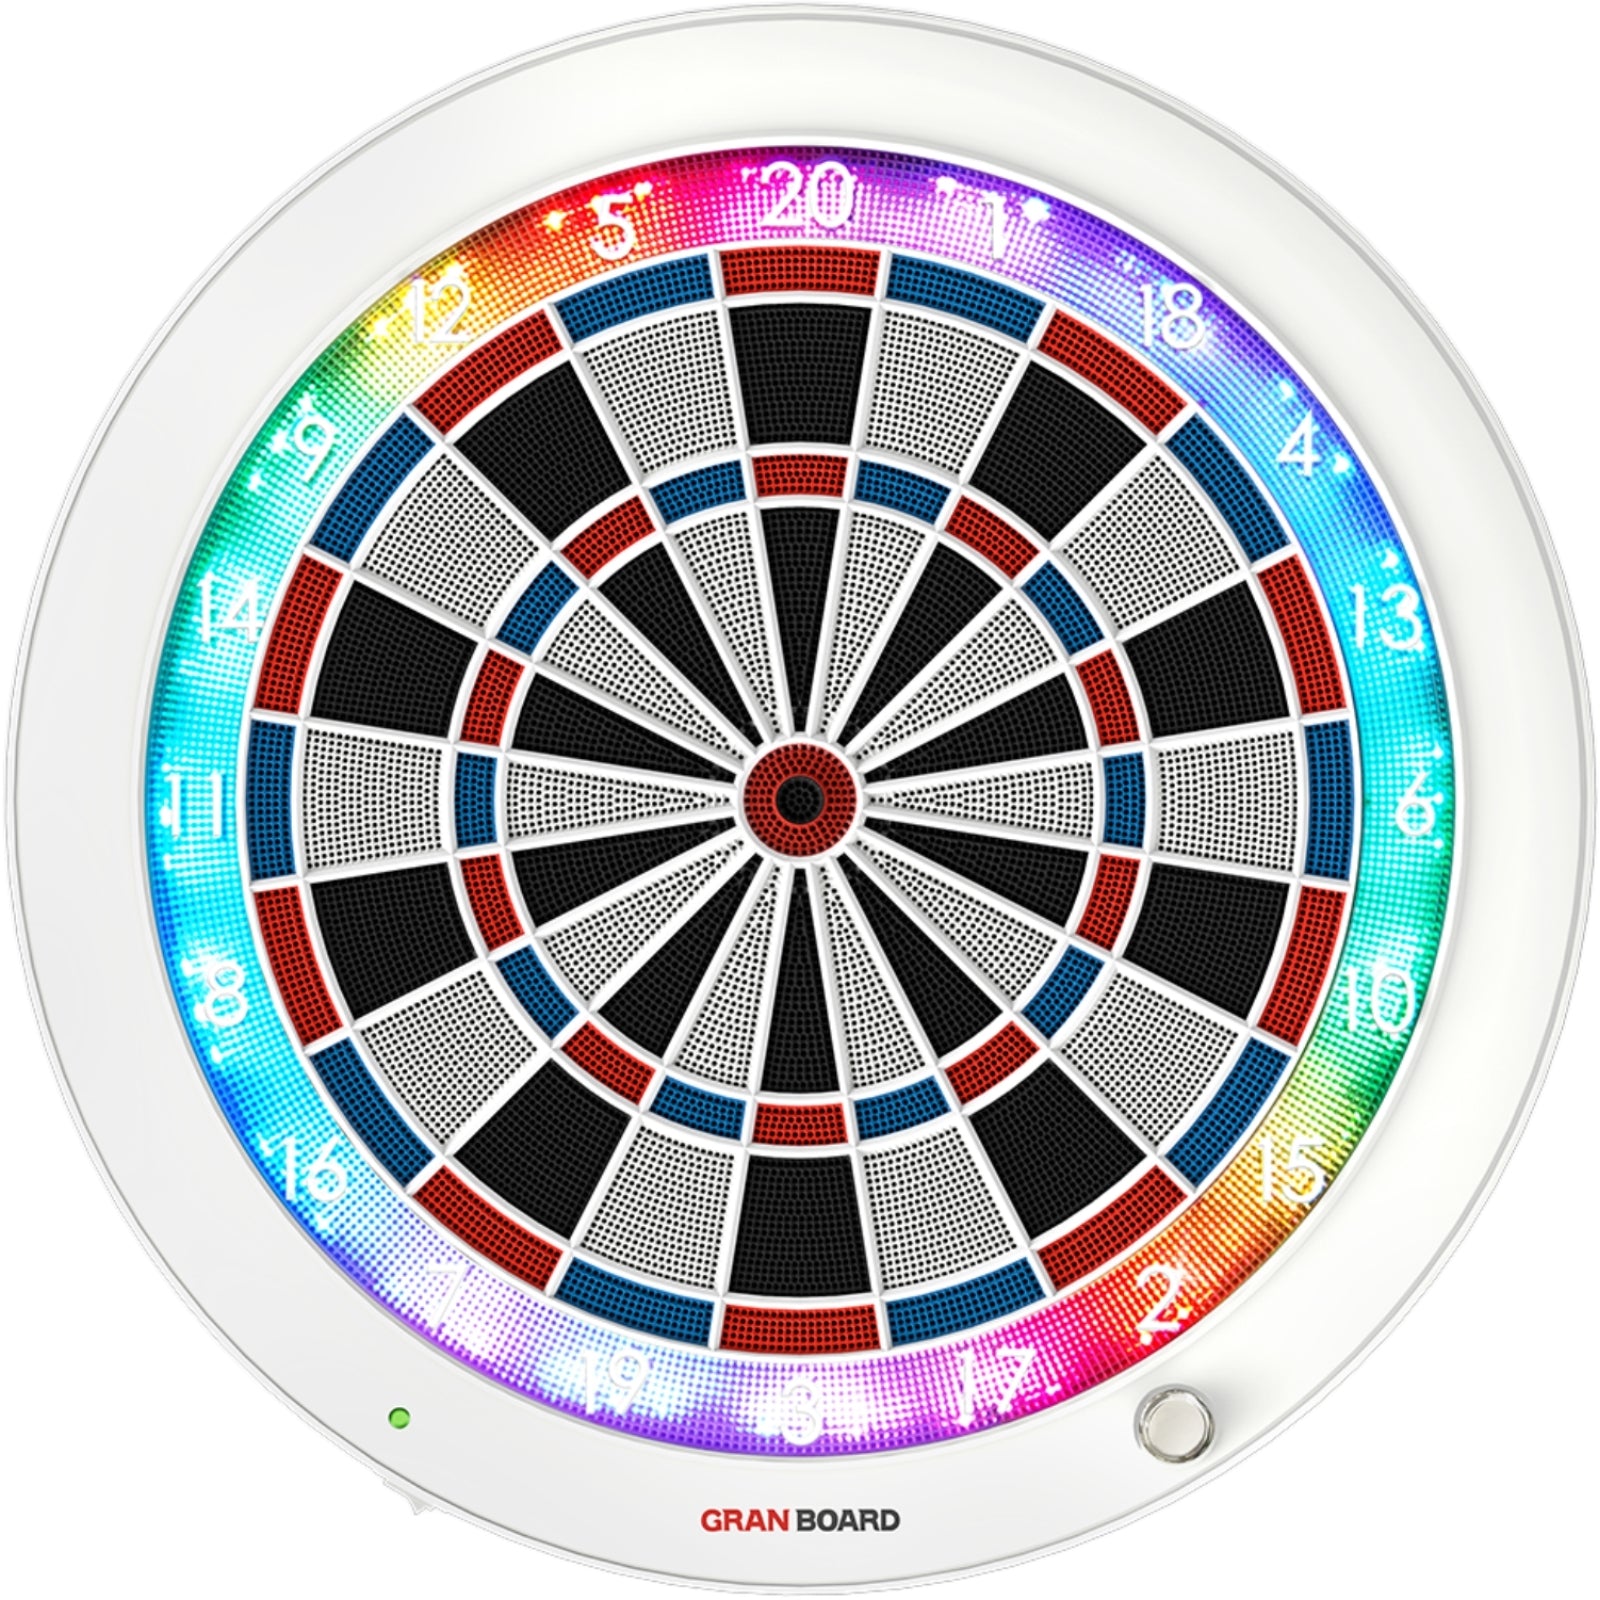 Dartboards - Gran Darts - GranBoard 3s - Bluetooth Electronic LED Soft Tip Dartboard - Special Edition White 